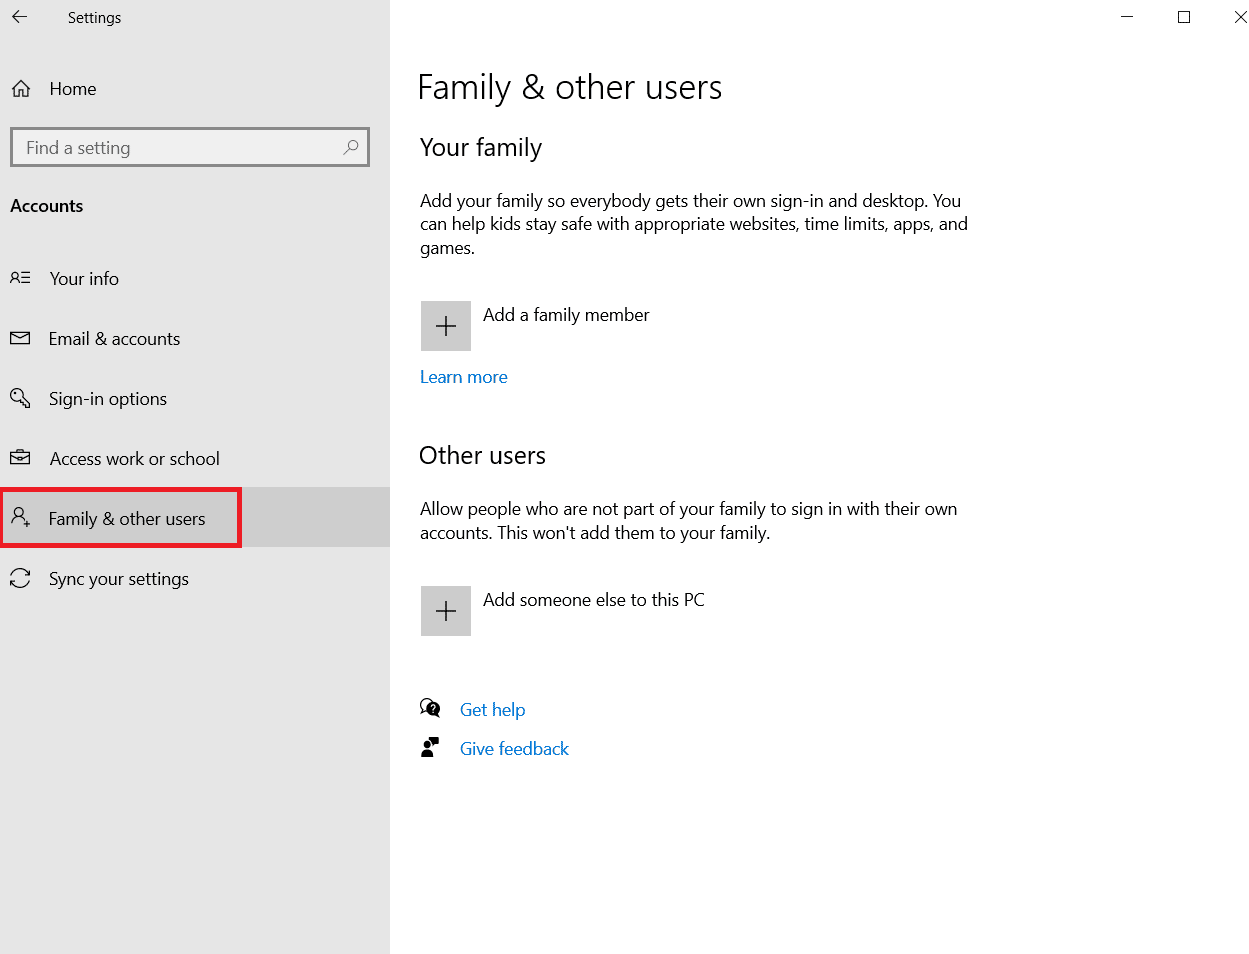 Select the Family and other users option